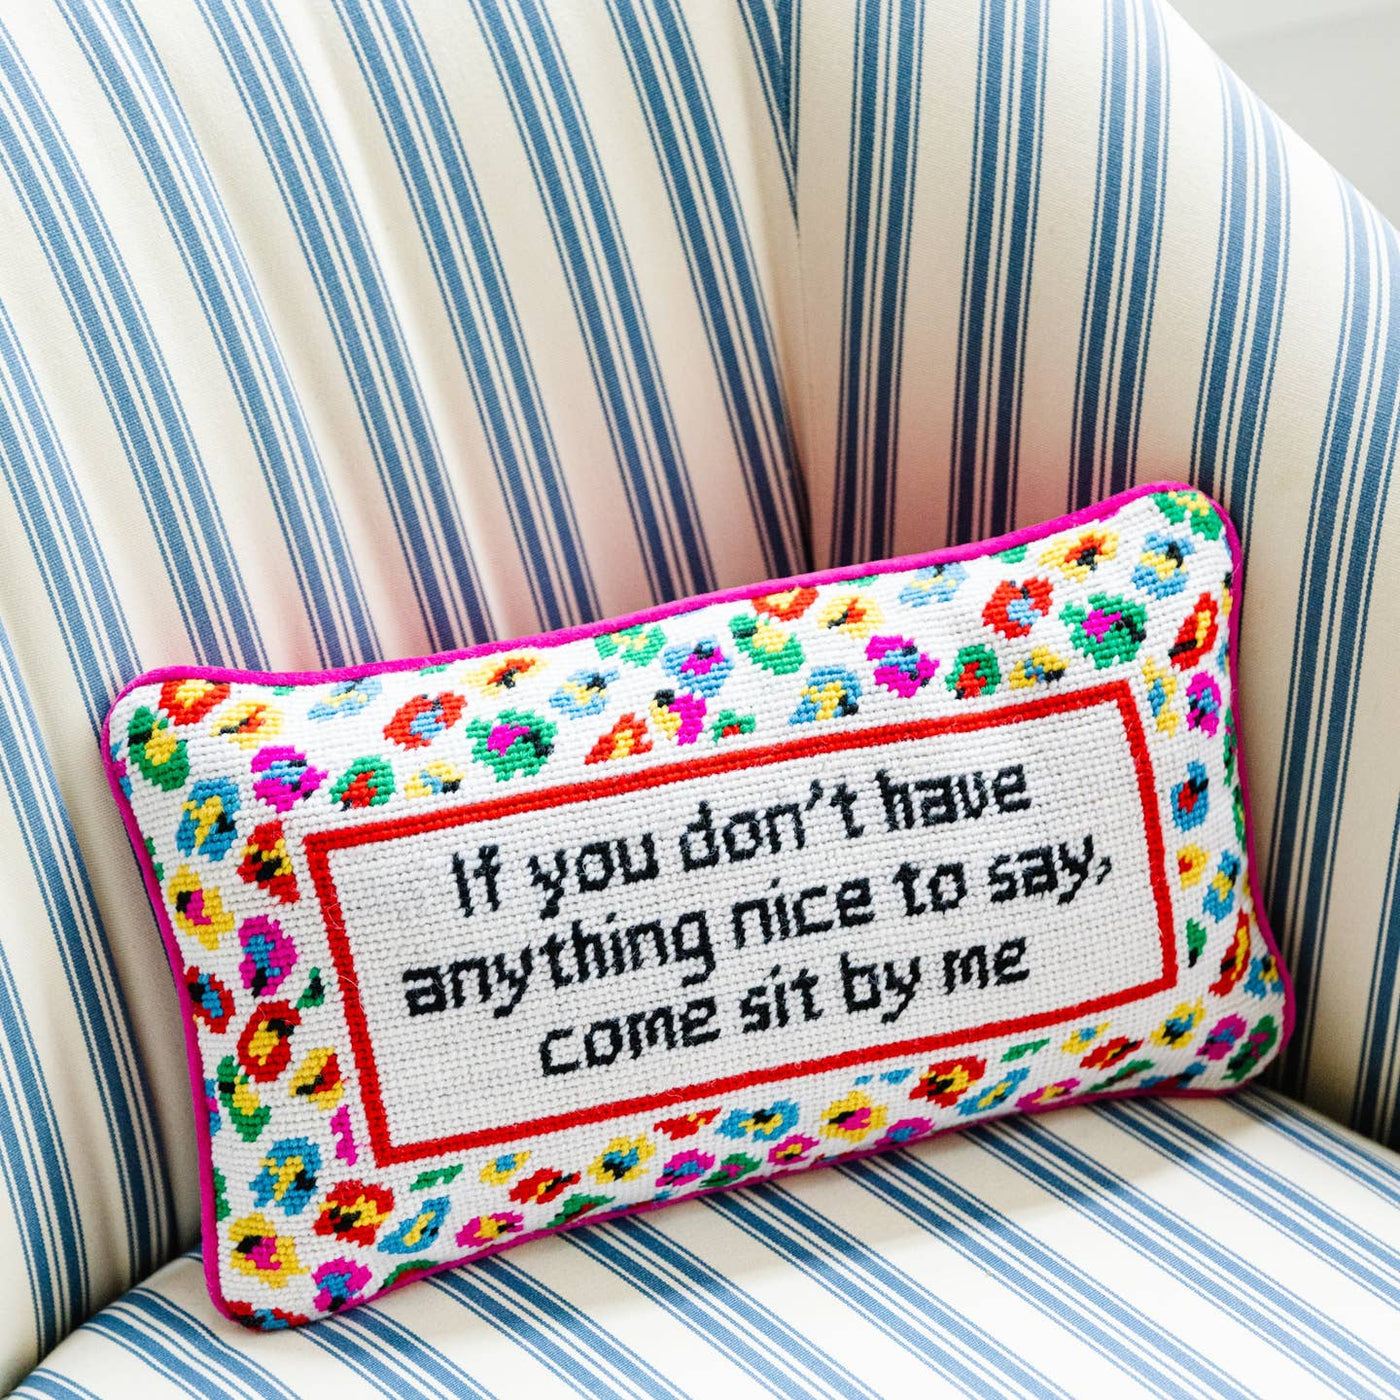 Come Sit By Me Needlepoint Pillow